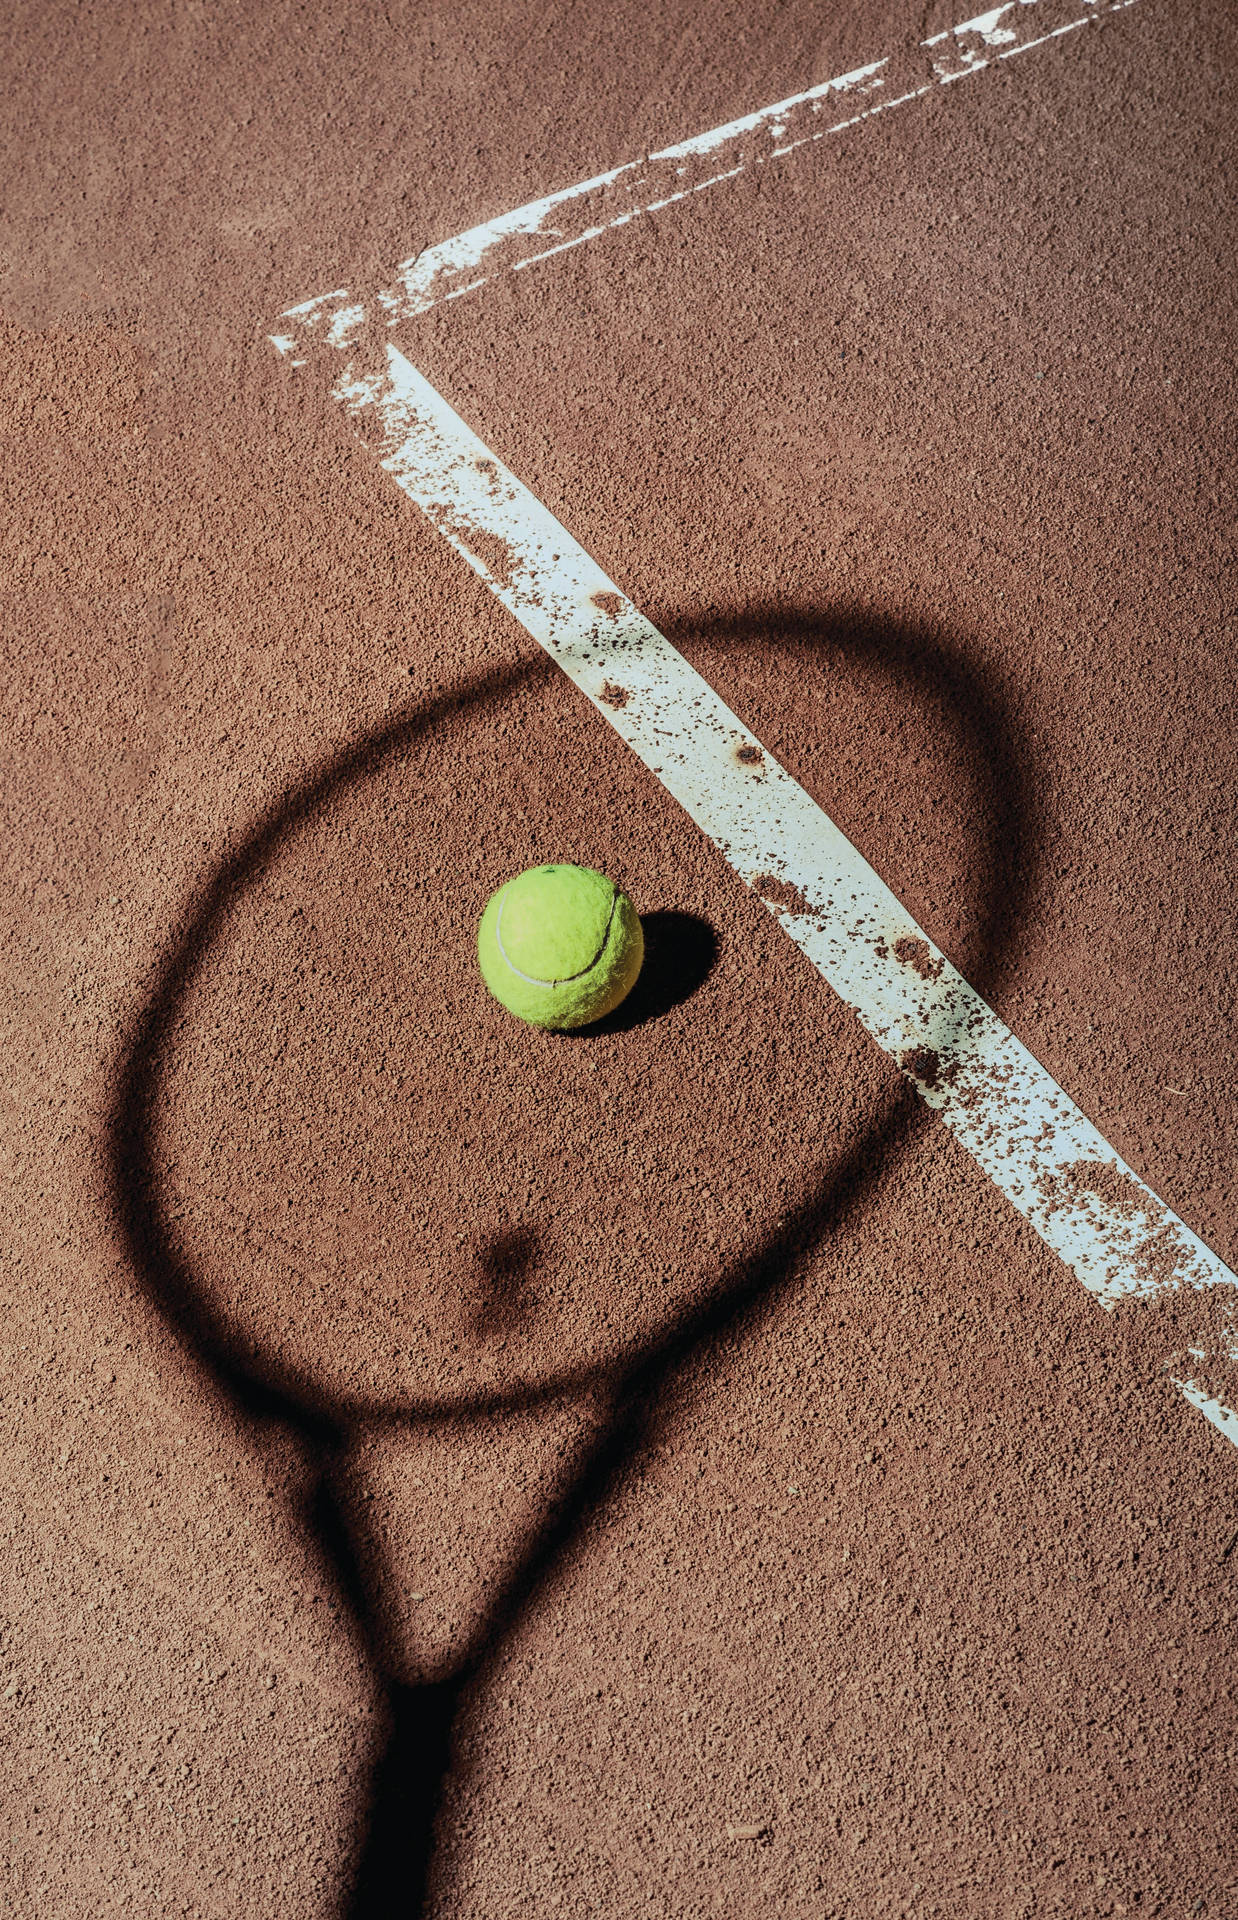 Tennis 3612X5604 Wallpaper and Background Image